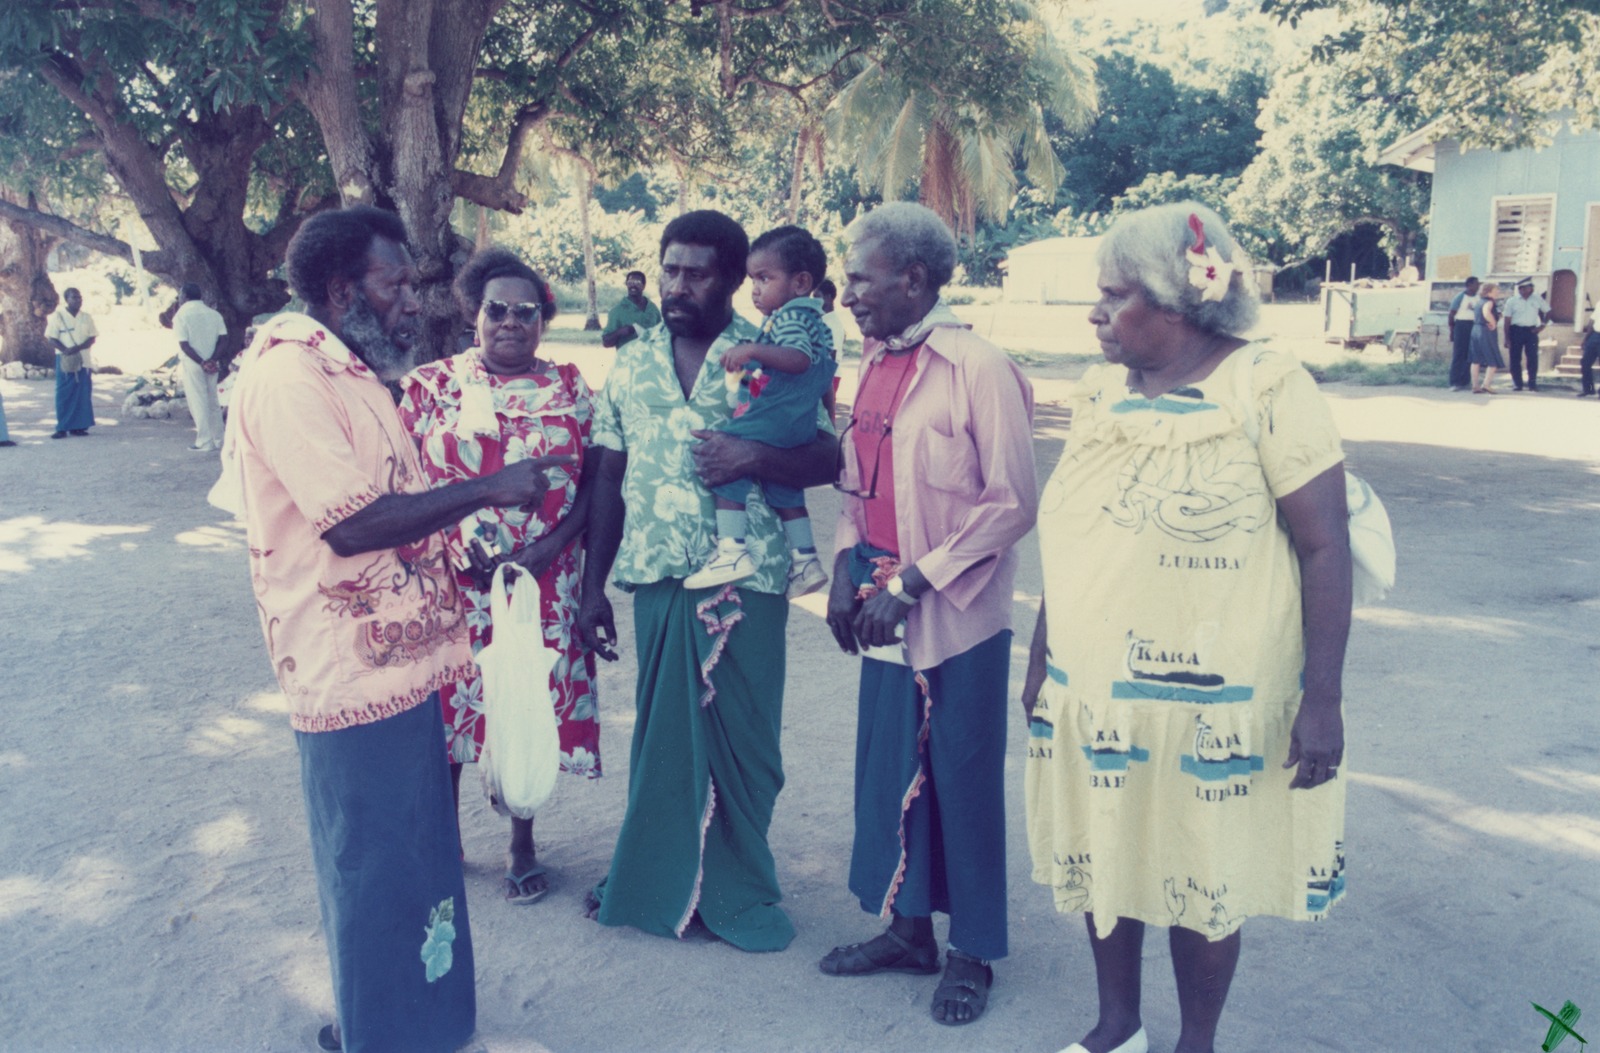 A group of torres strait islander people wearing colourful and floral clothing